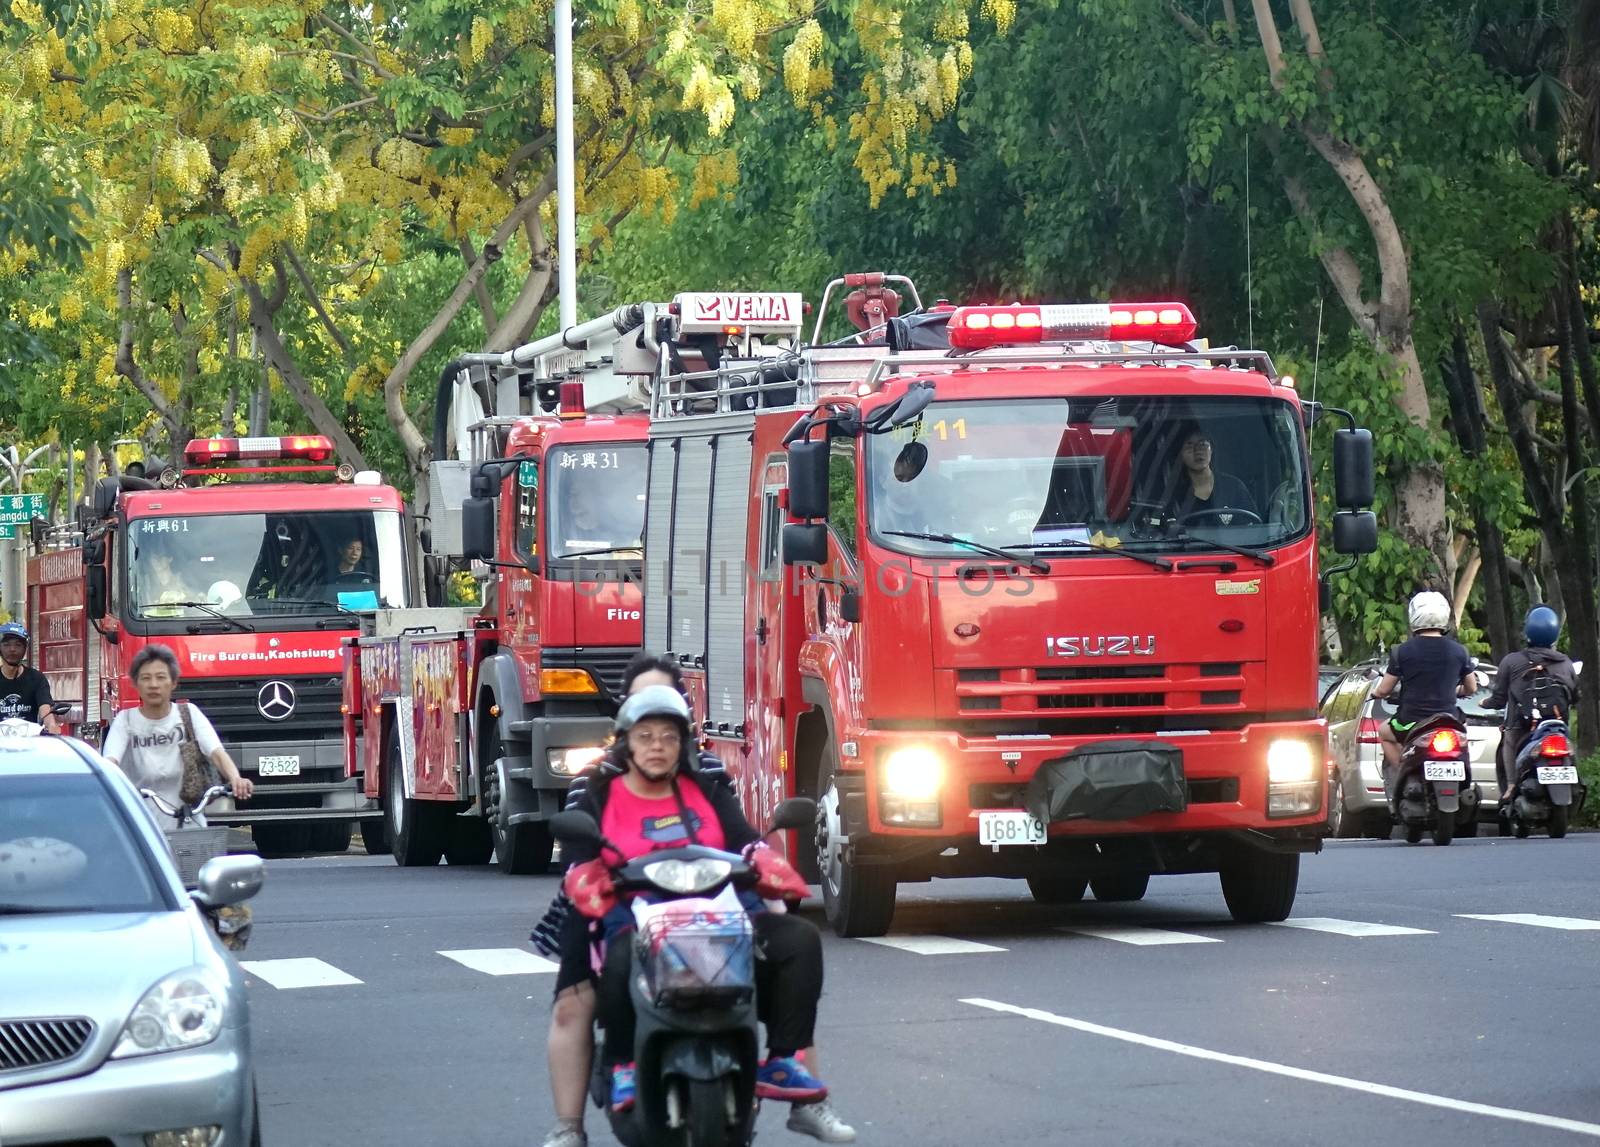 KAOHSIUNG, TAIWAN -- MAY 26, 2018: Three fire truck are on an early evening rescue mission in the city of Kaohsiung.
